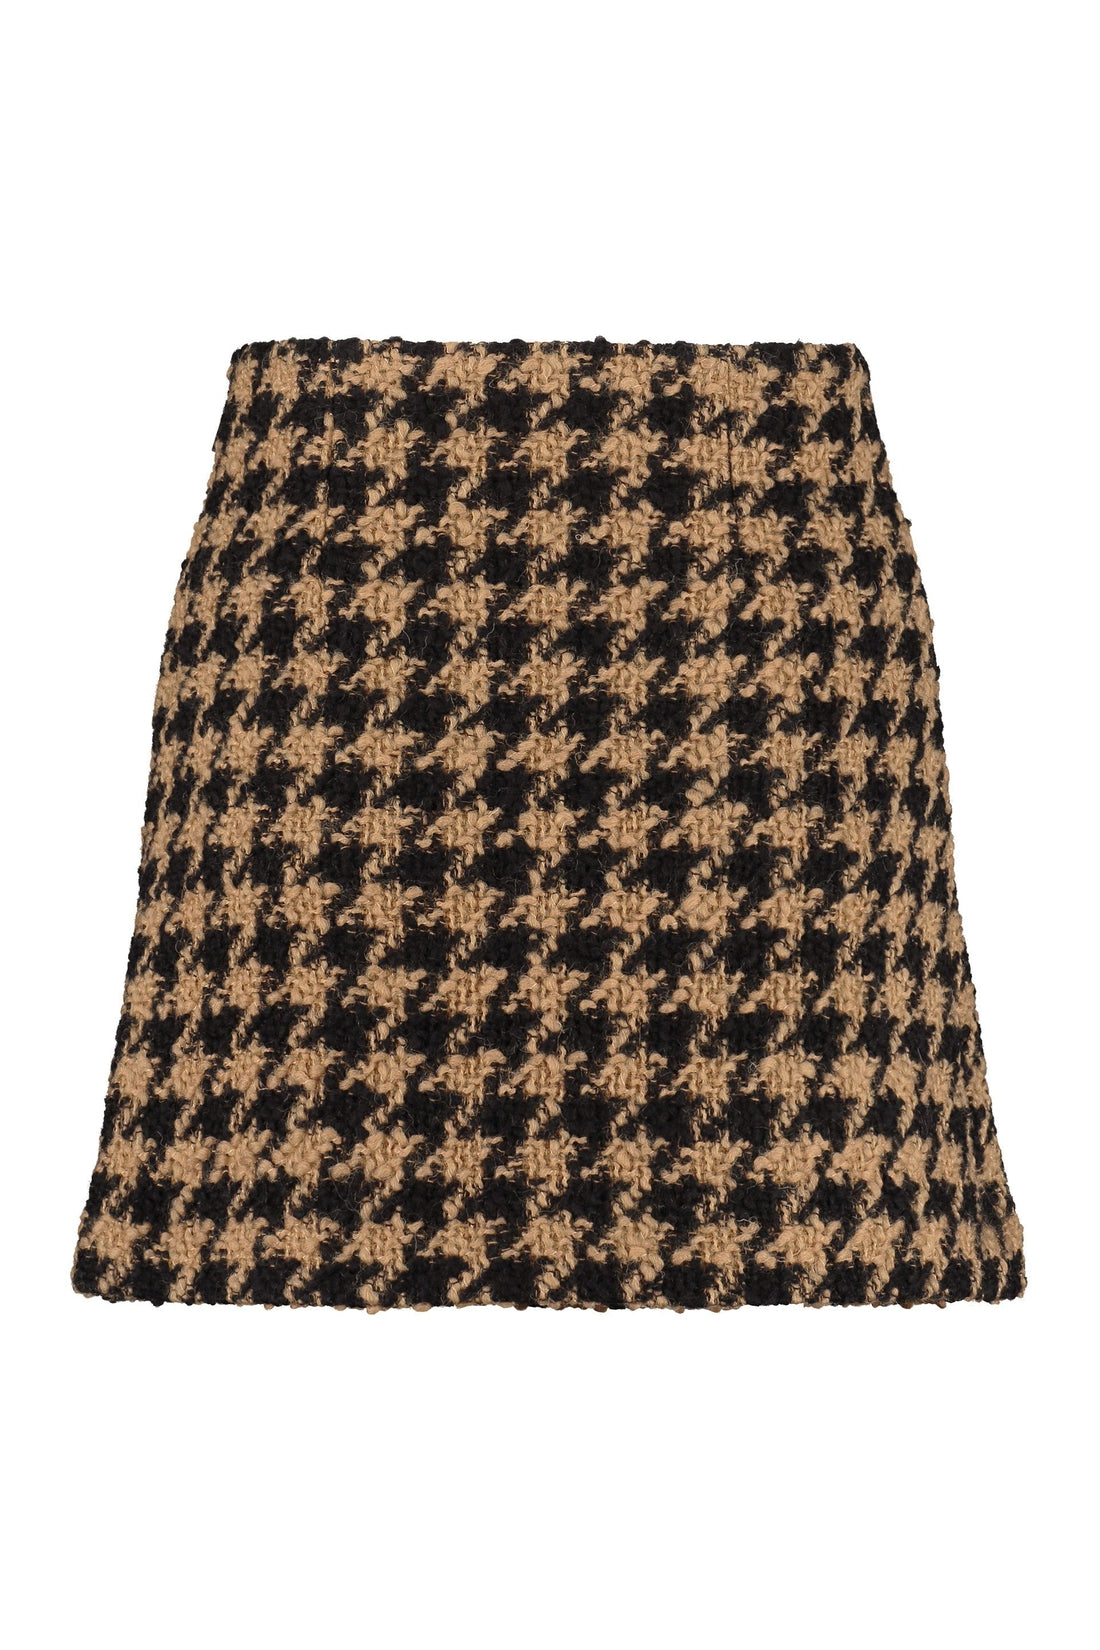 MSGM-OUTLET-SALE-Houndstooth mini skirt-ARCHIVIST